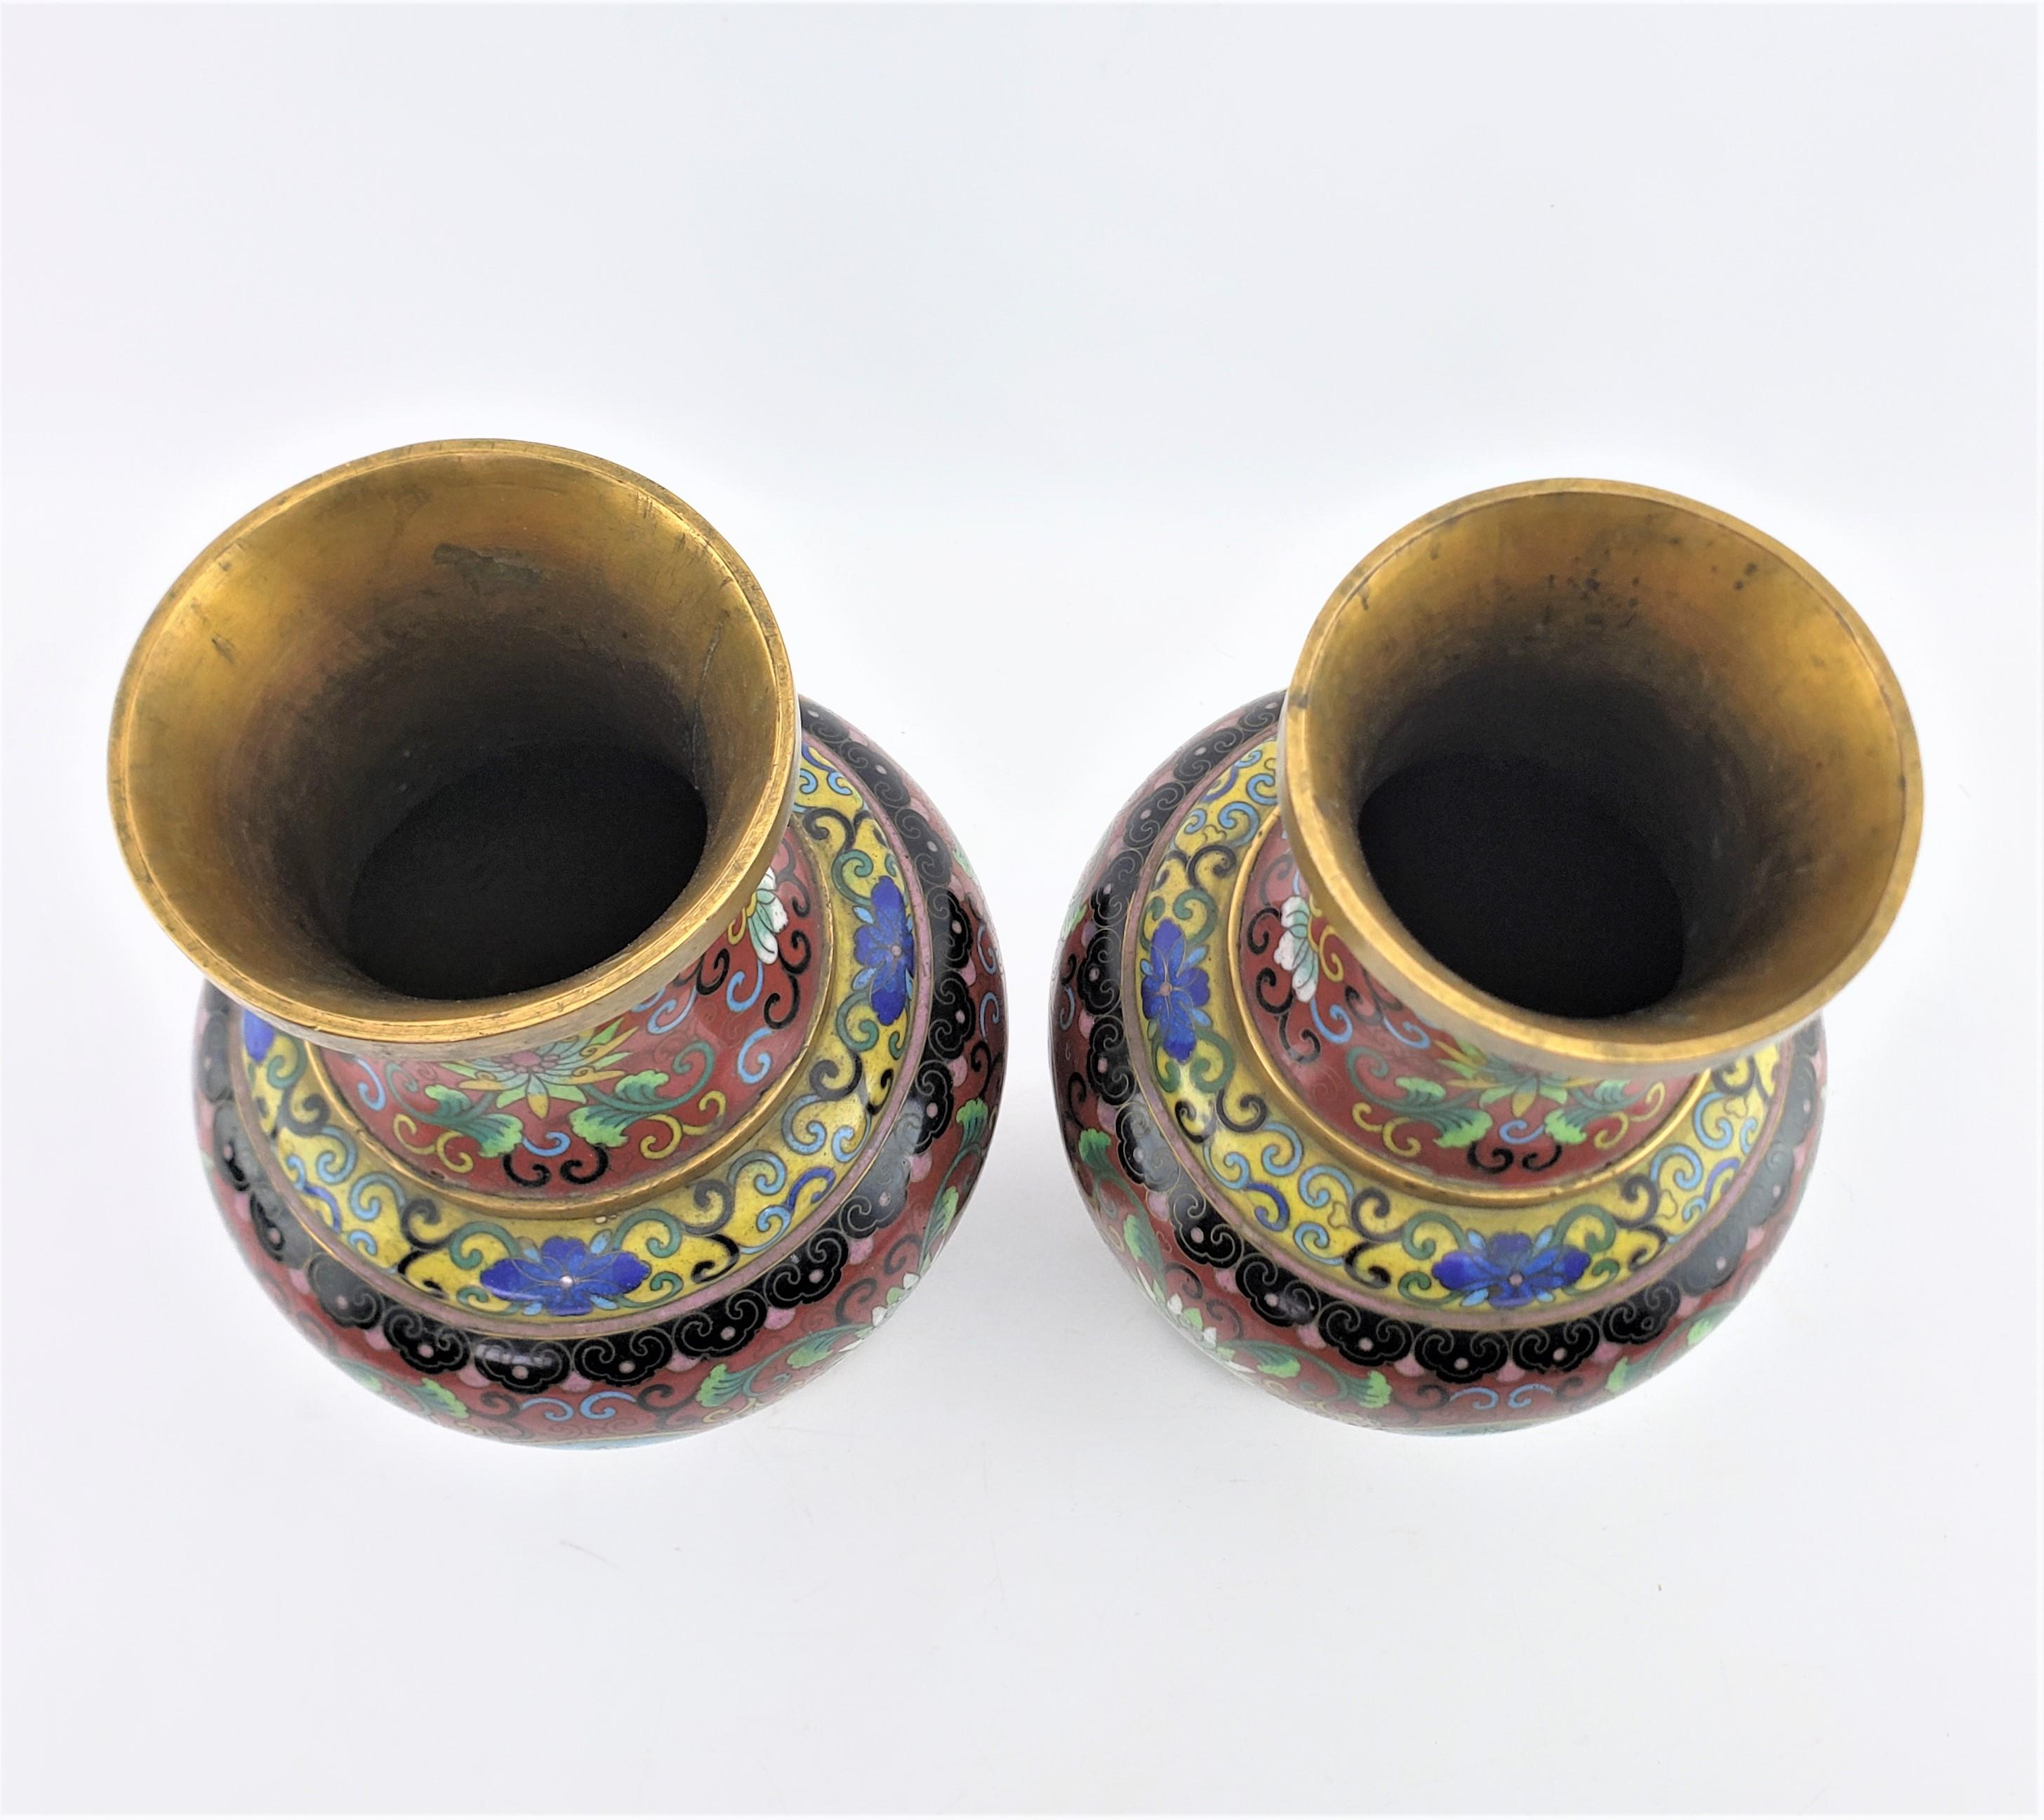 Pair of Early Chinese Republic Era Cloisonne Vases with Stylized Floral Motif For Sale 2